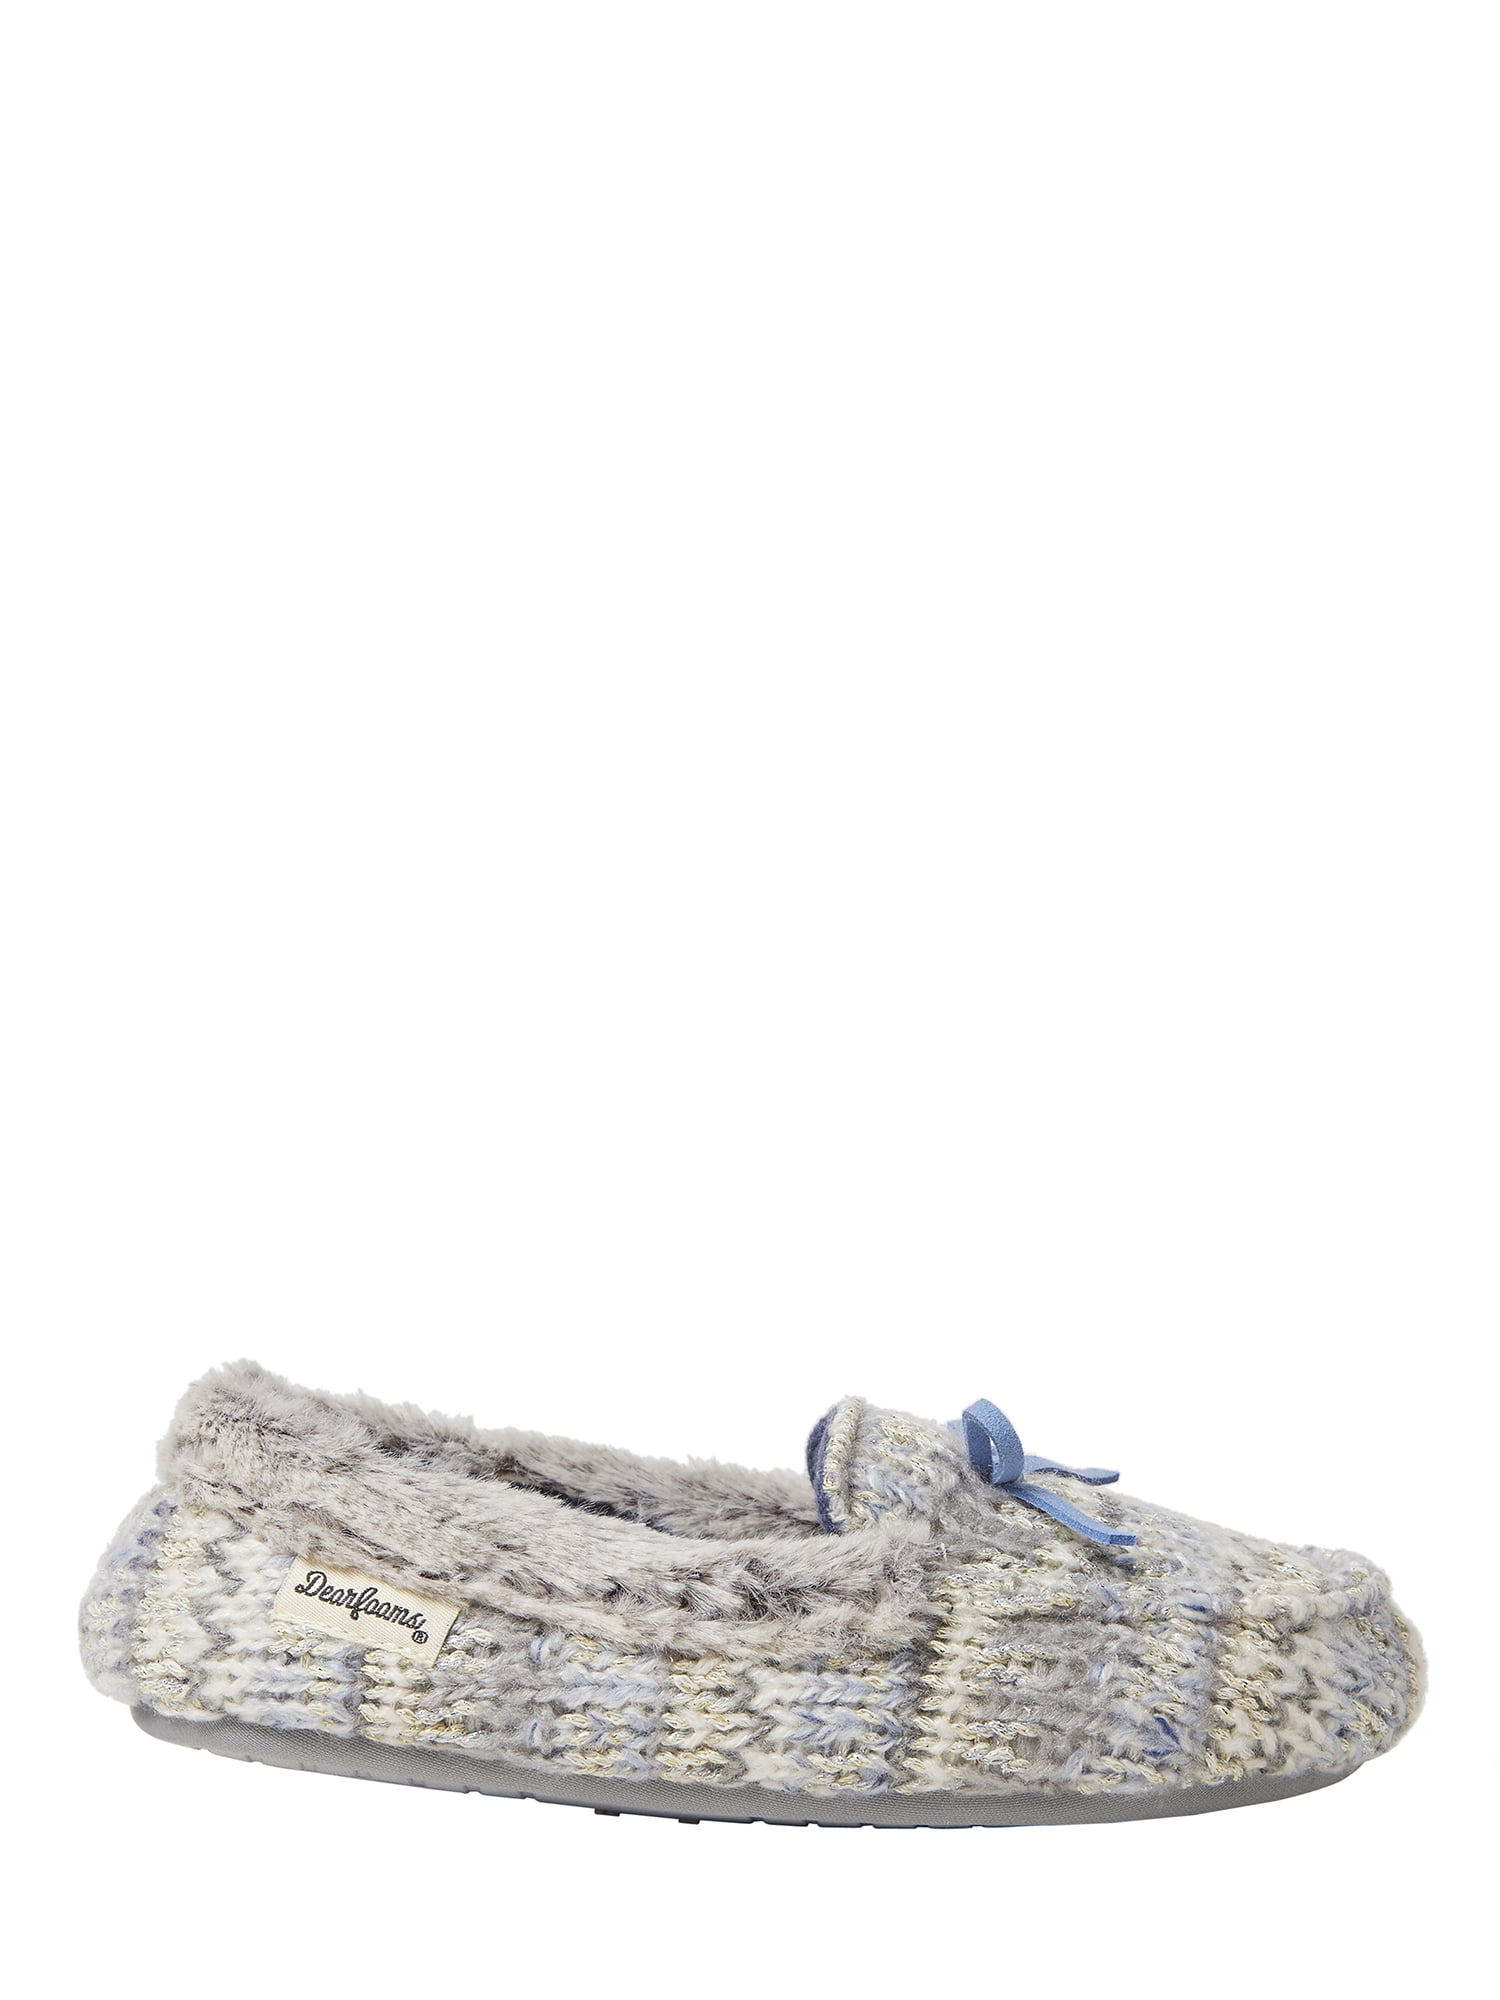 kids moccasin slippers